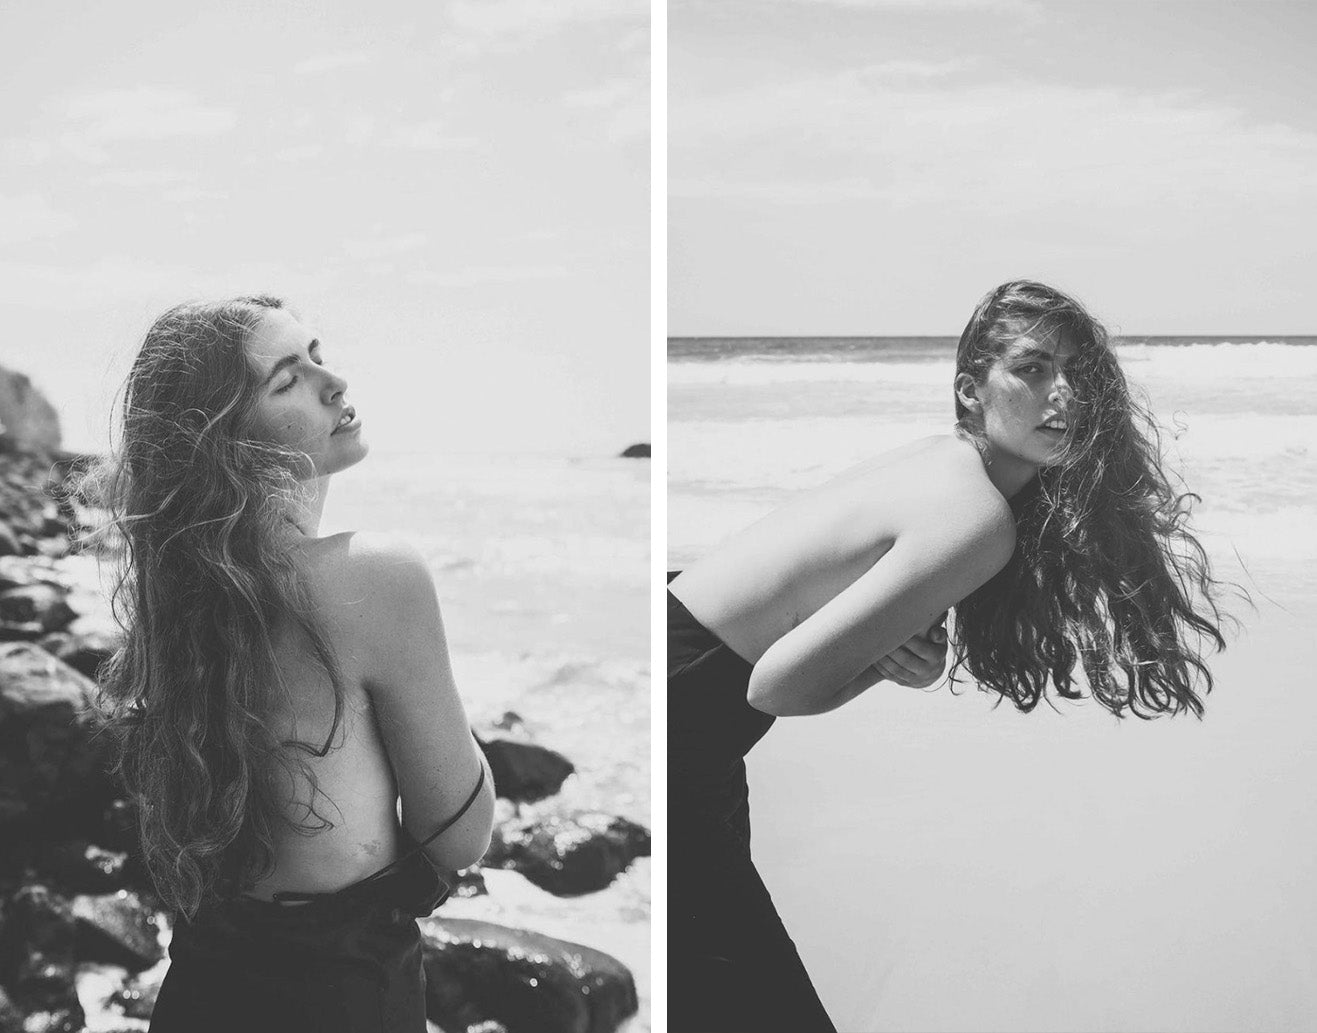 Black and white photoshoot of young women on the beach